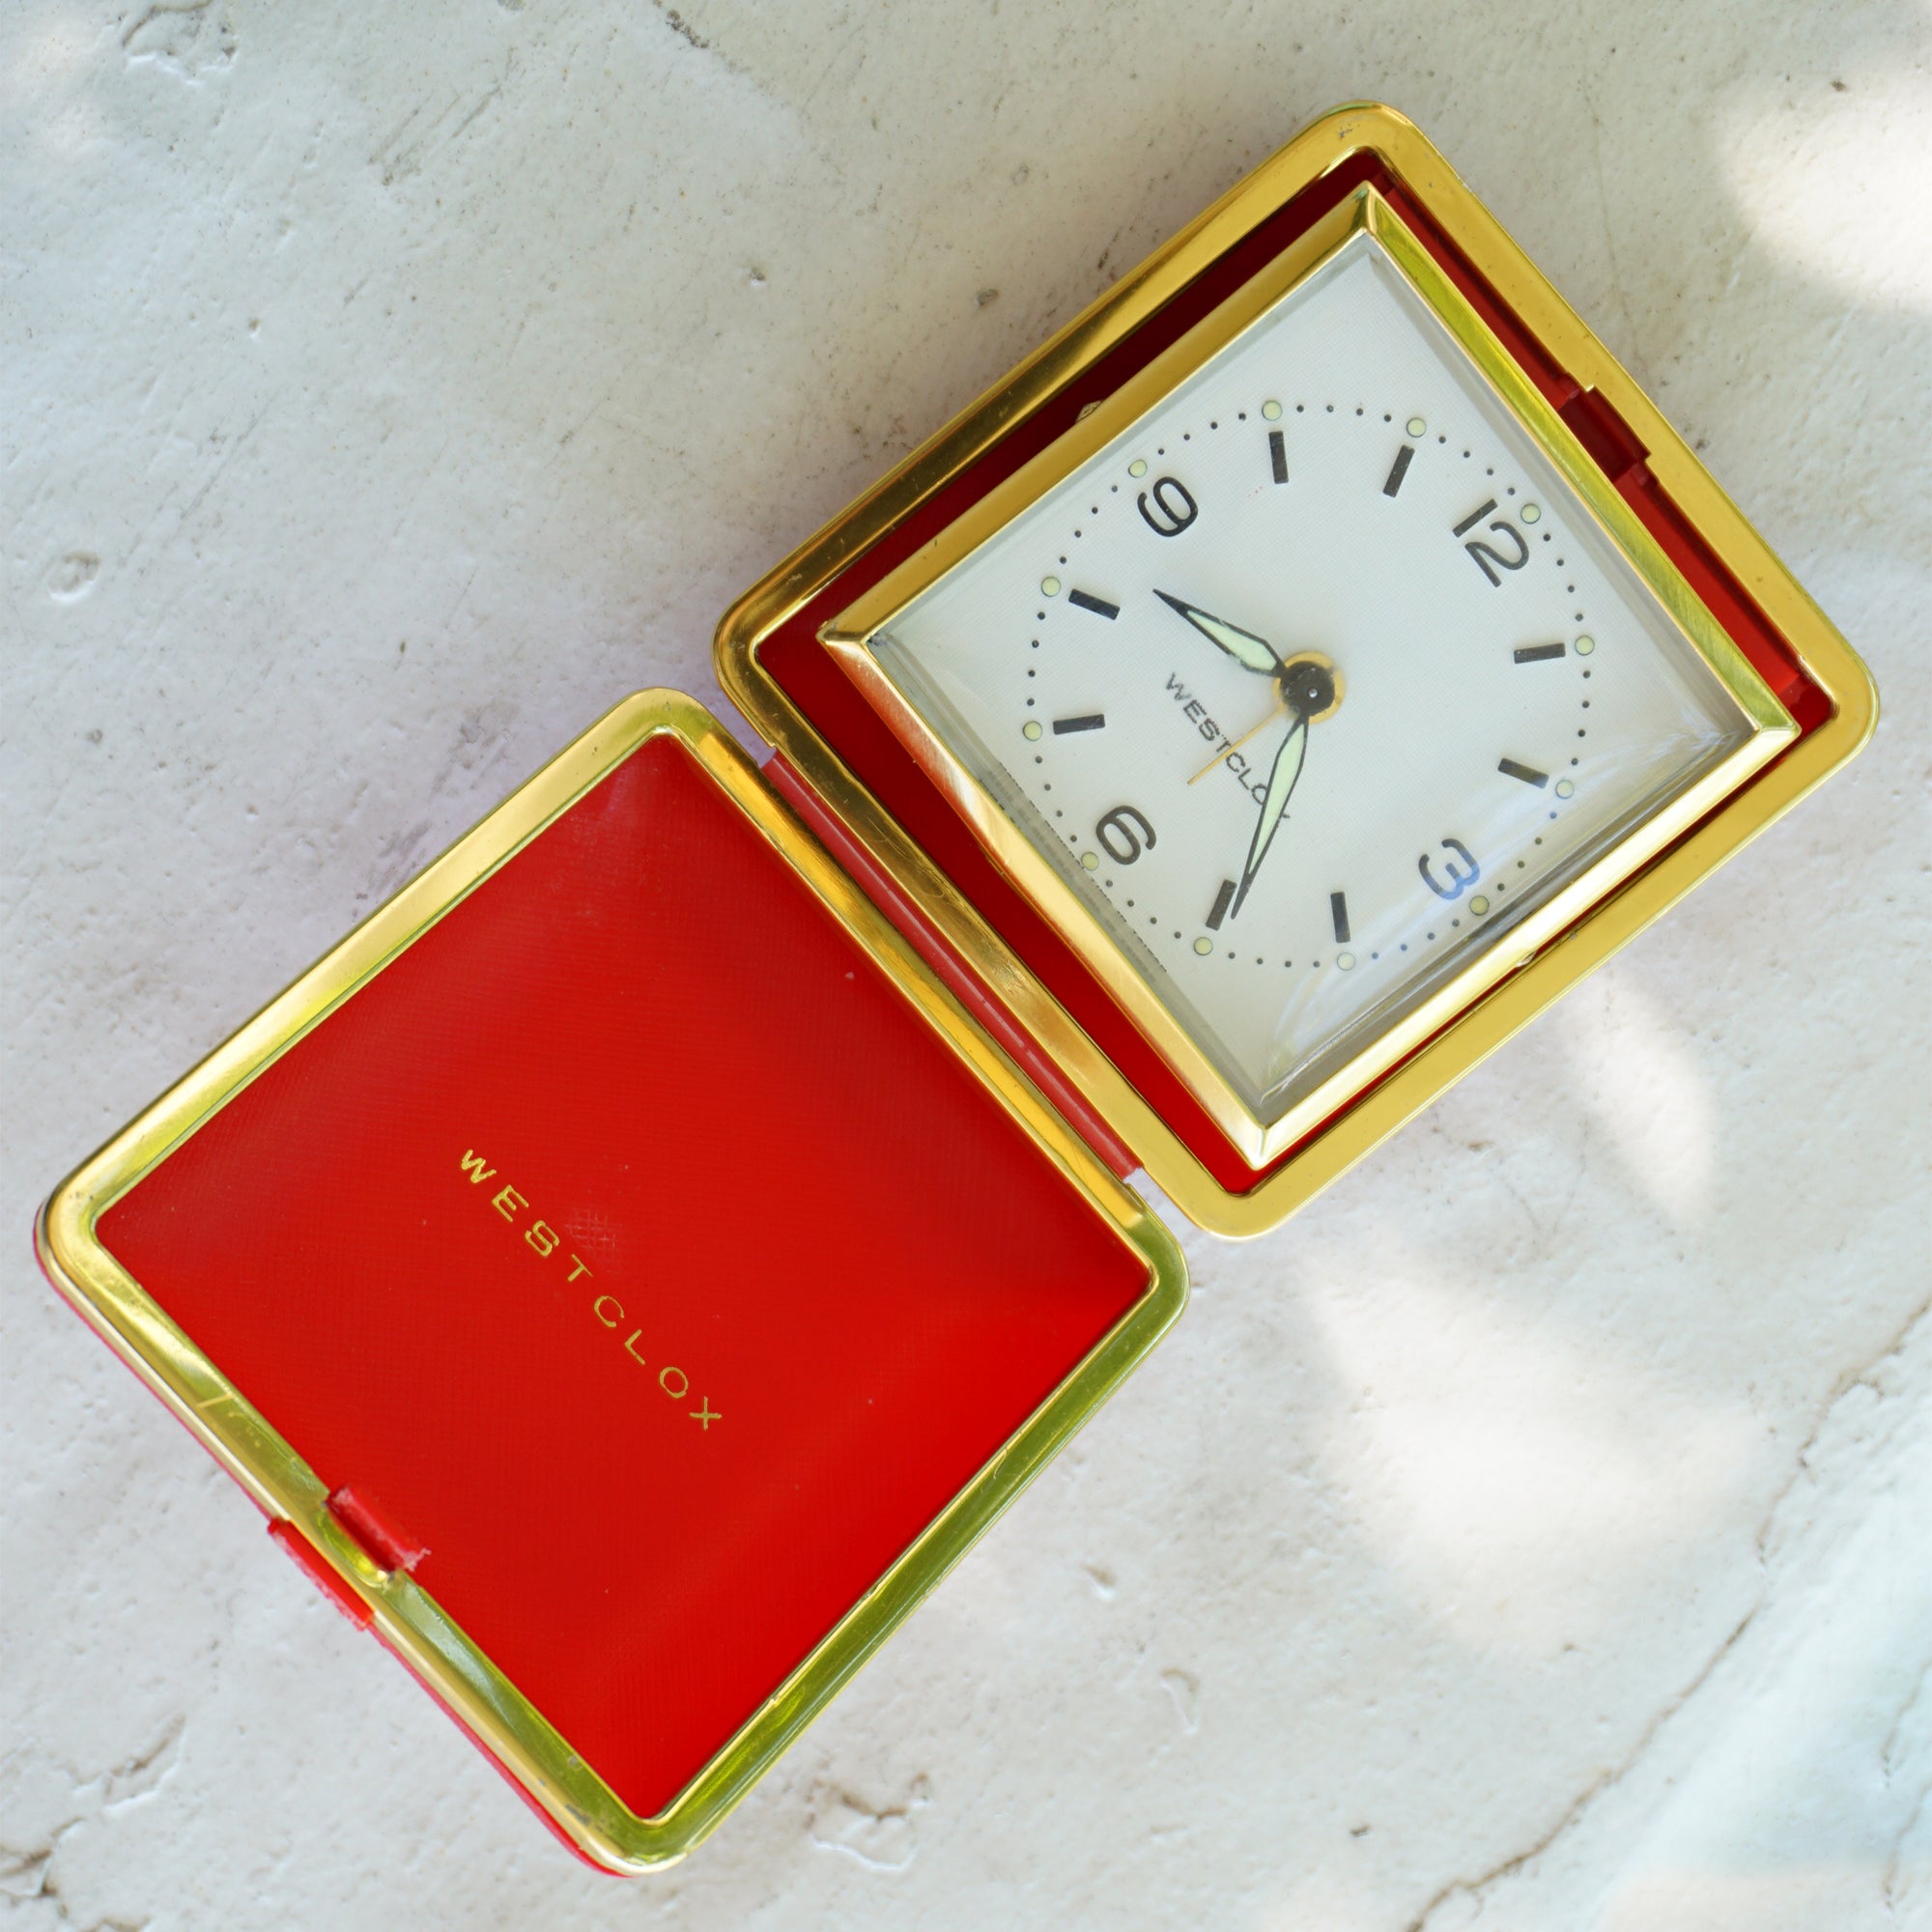 Vintage WESTCLOX Gold Tone Mechanical Travel Alarm Clock in Red Case. Made by General Time in Taiwan.